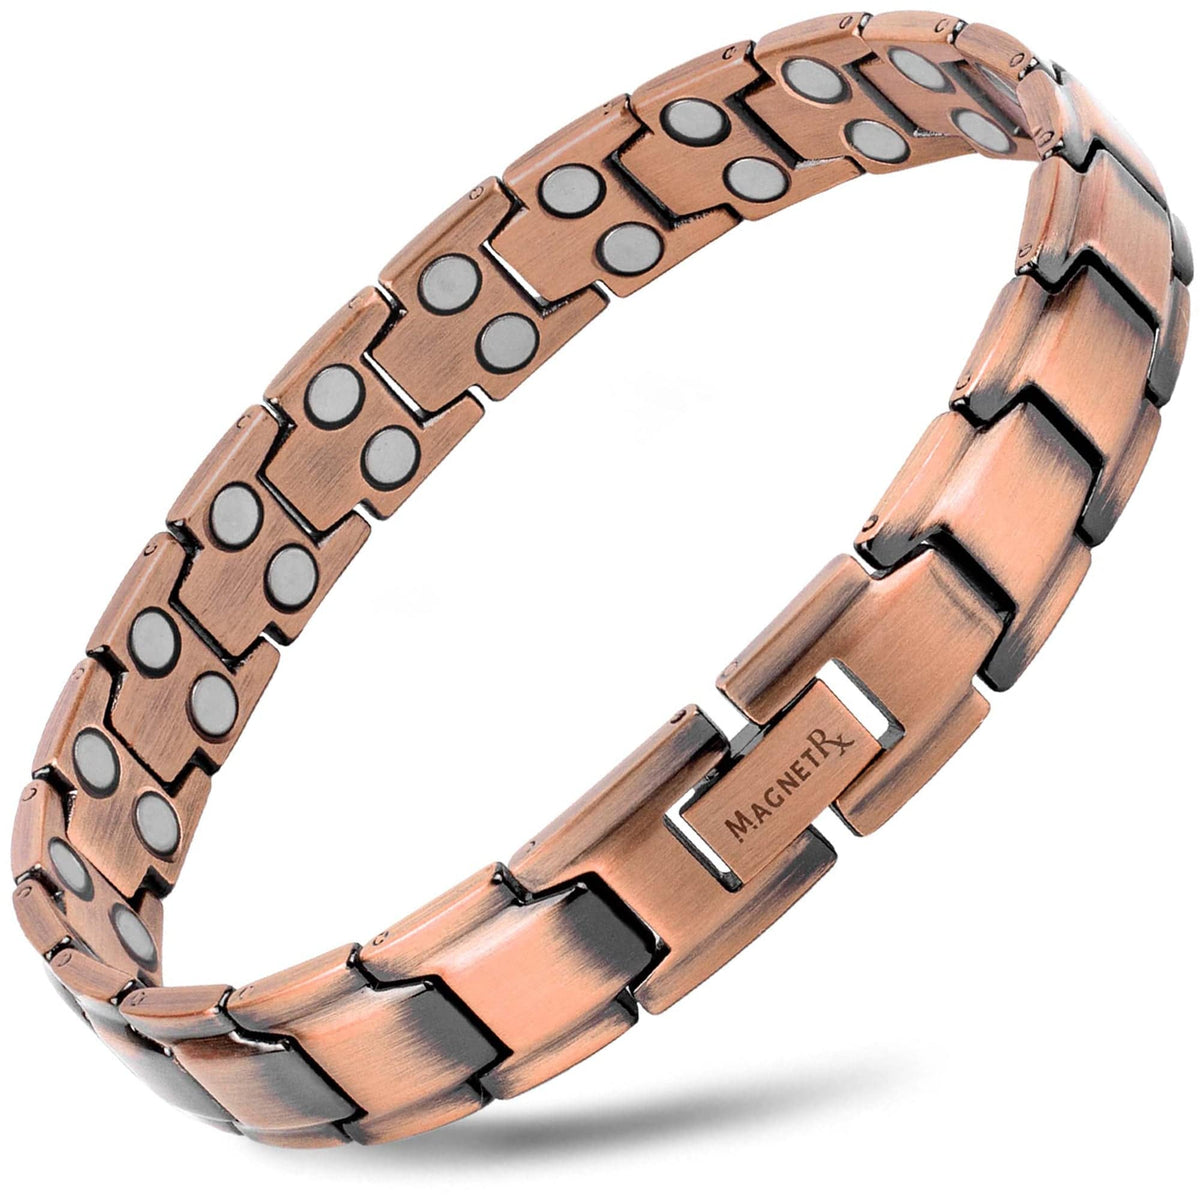 Ultra Strength Pure Copper Magnetic Therapy Bracelet (Leo)